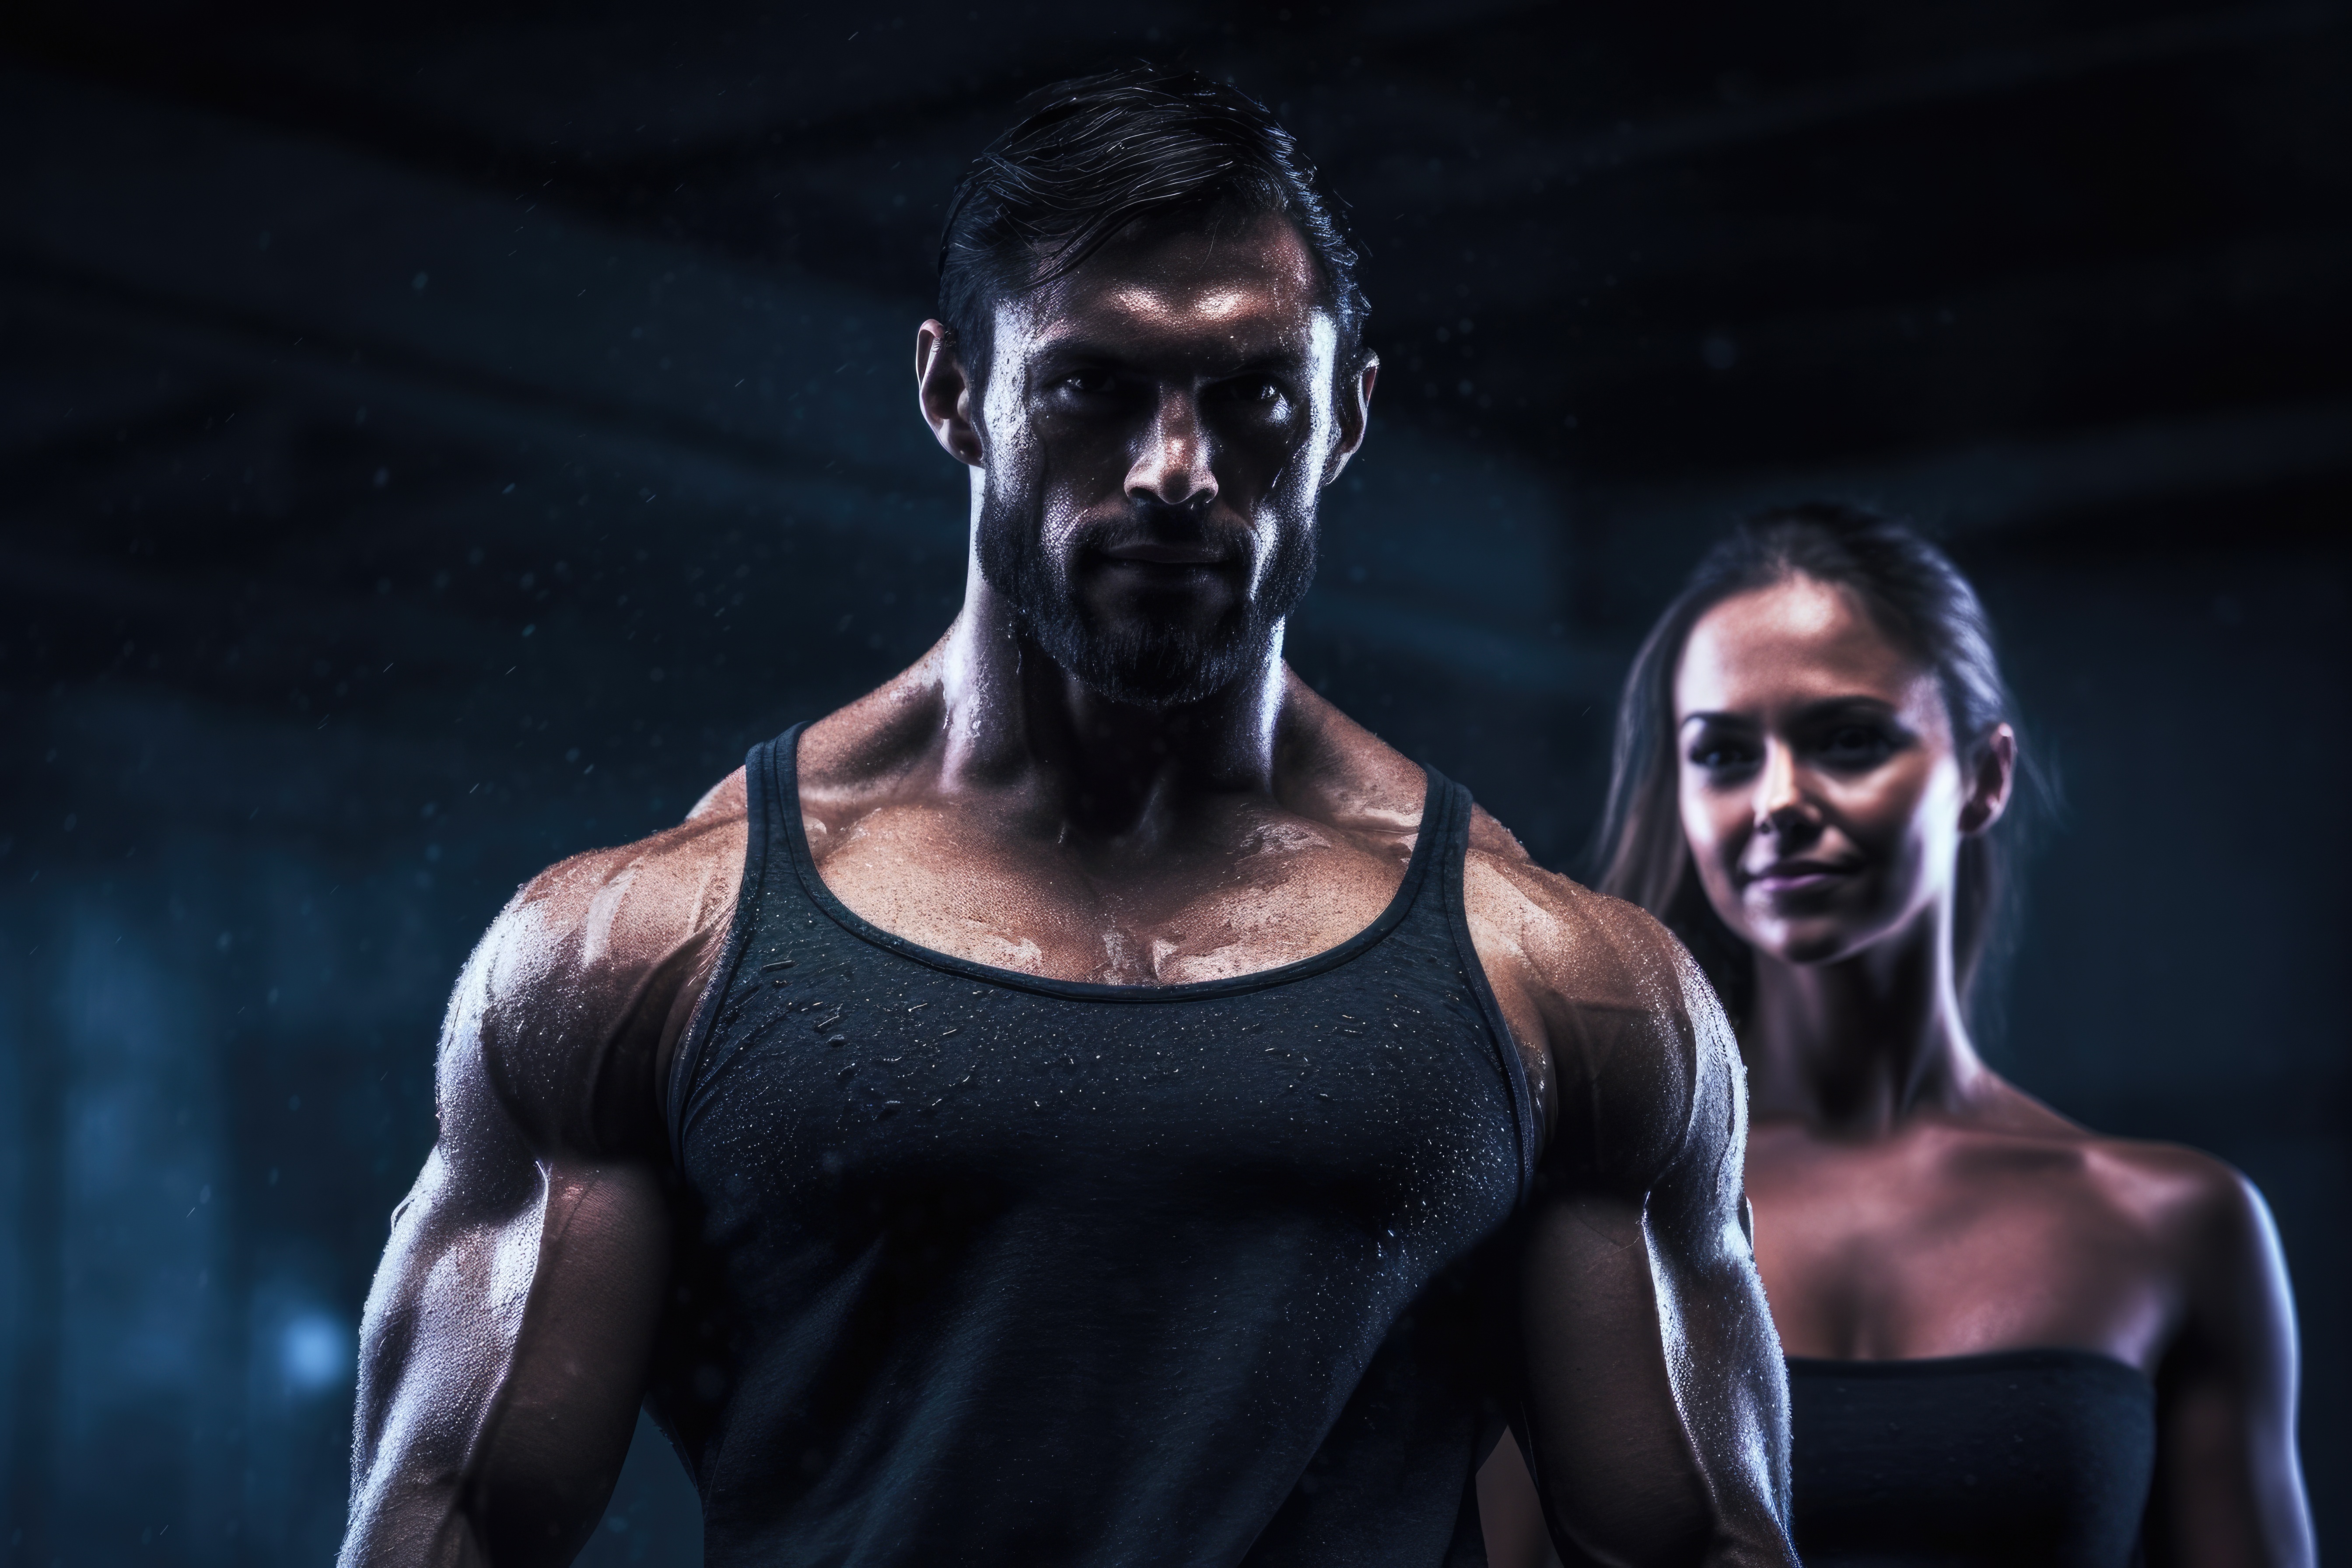 Gym Couple Wallpapers - Wallpaper Cave